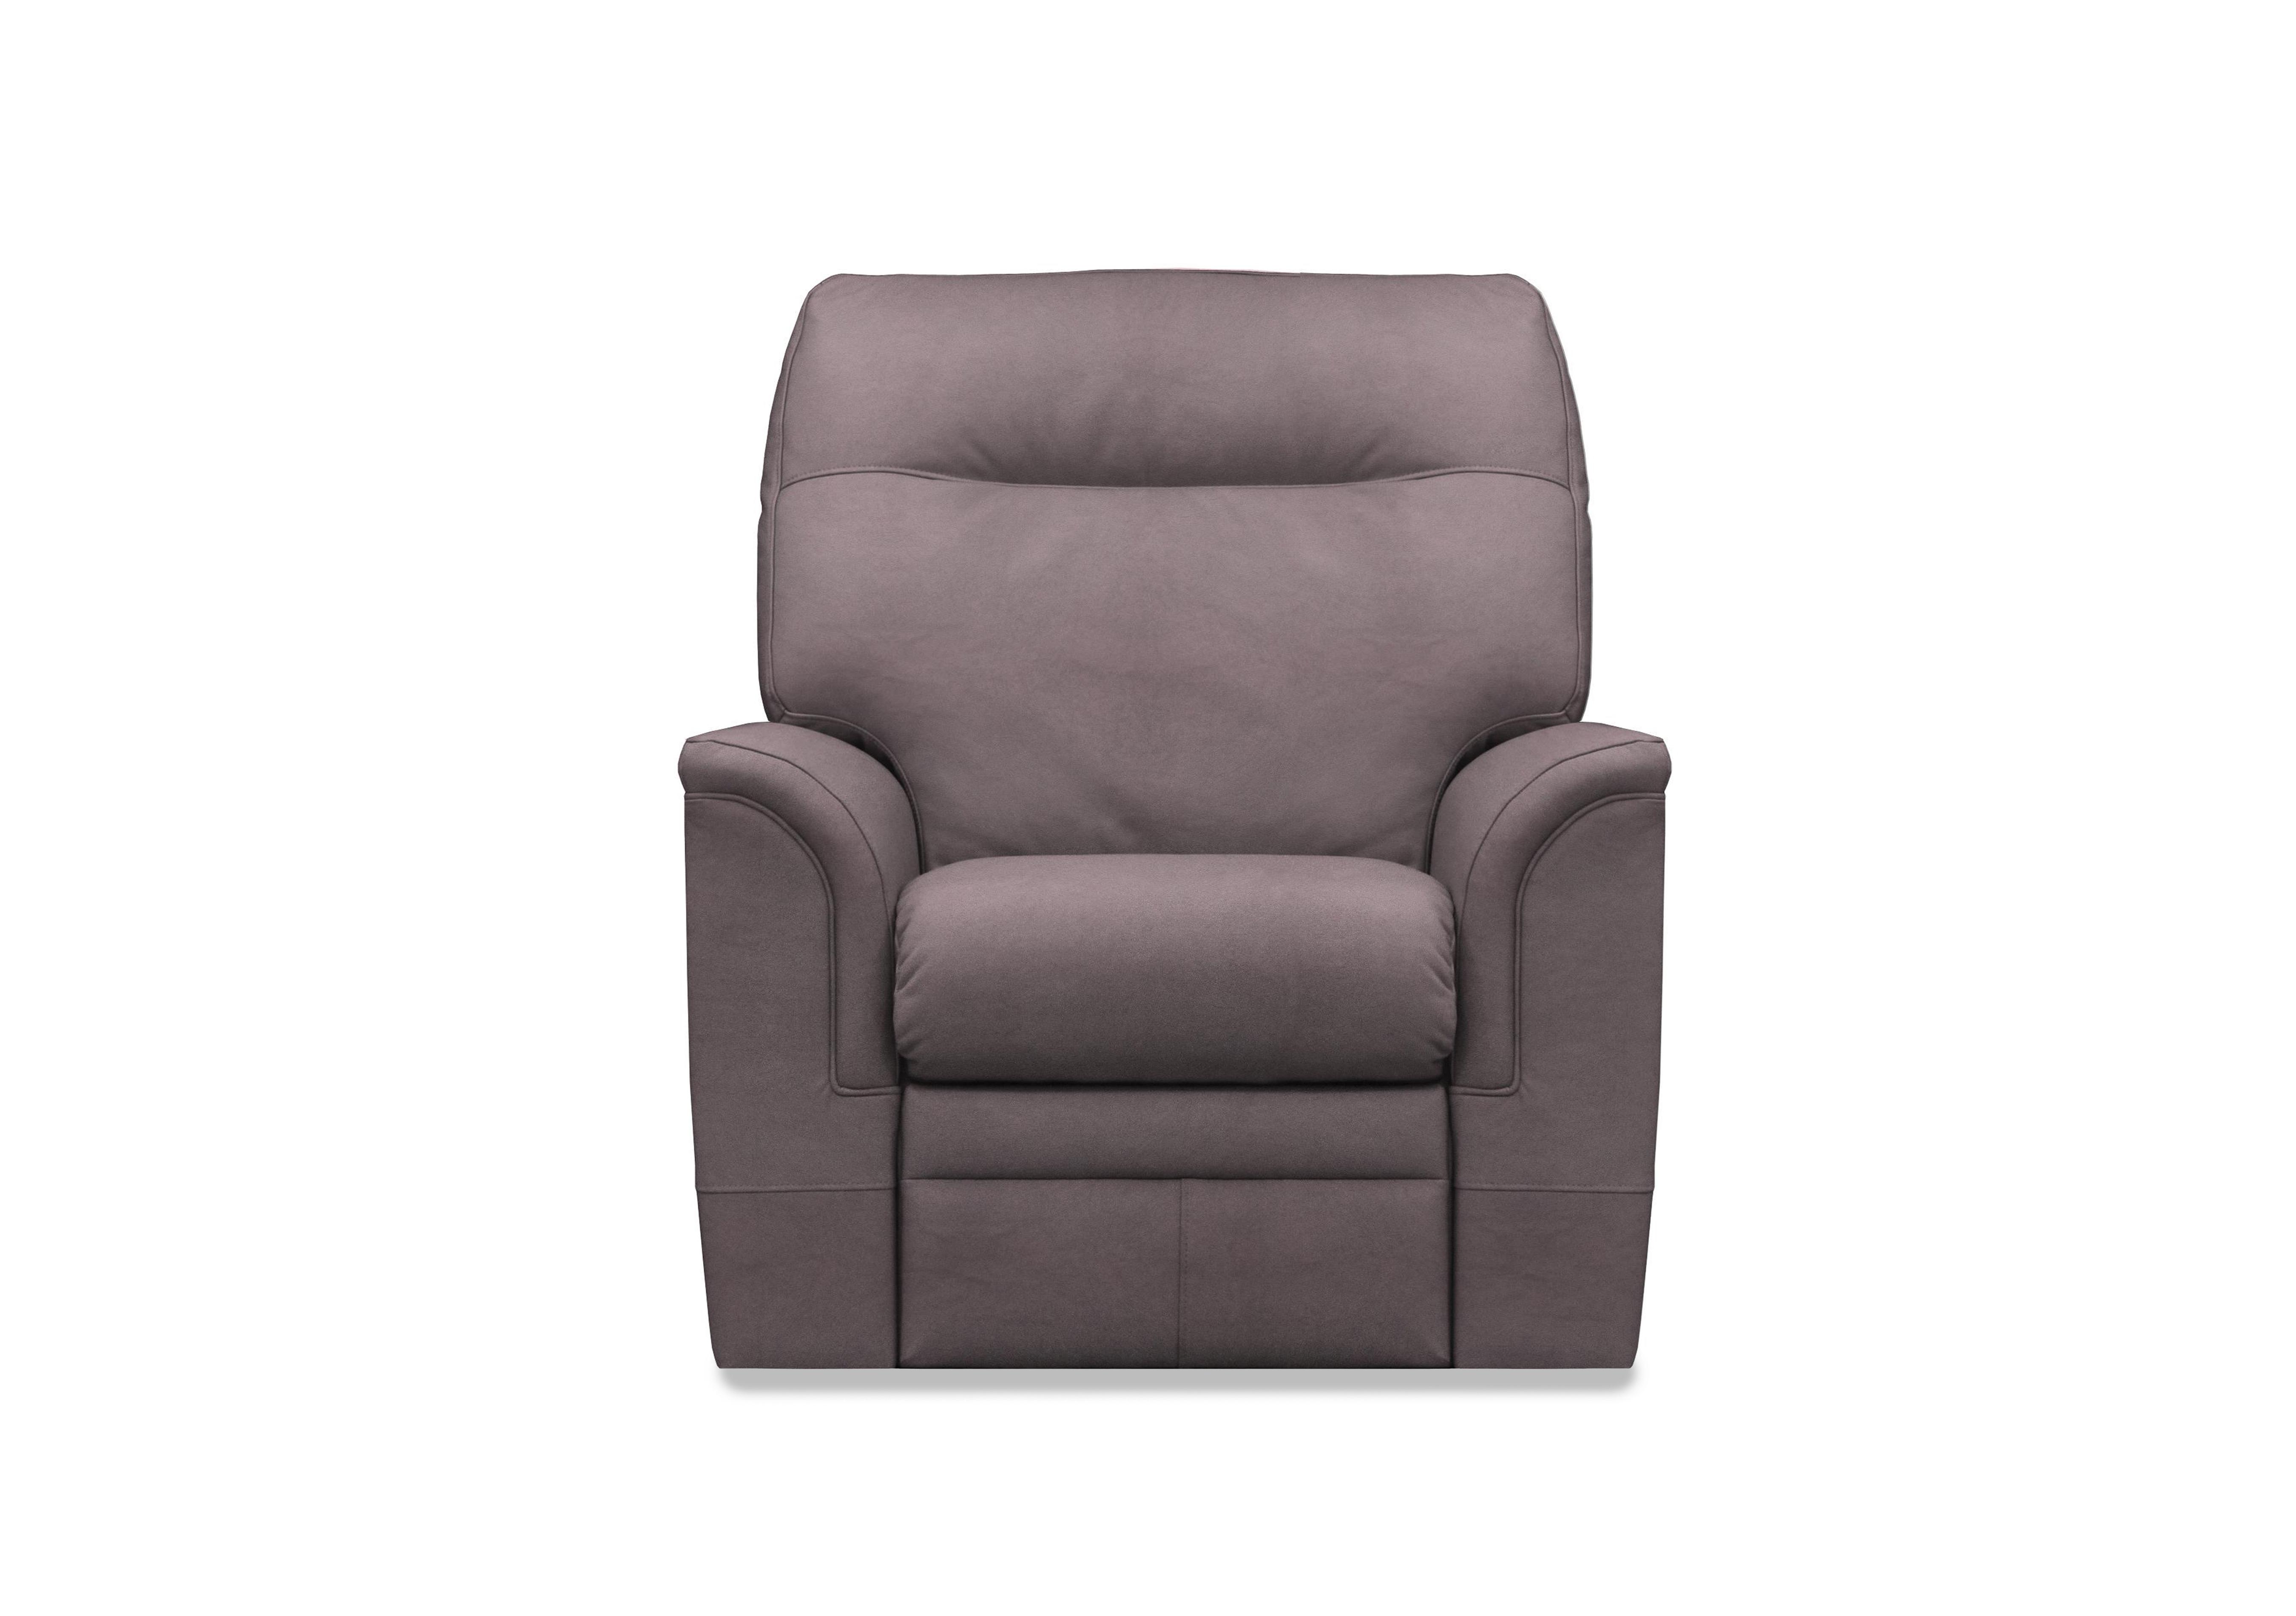 Hudson 23 Leather Power Recliner Chair with Power Headrest and Power Lumbar in Revolution Truffle 009027-0029 on Furniture Village